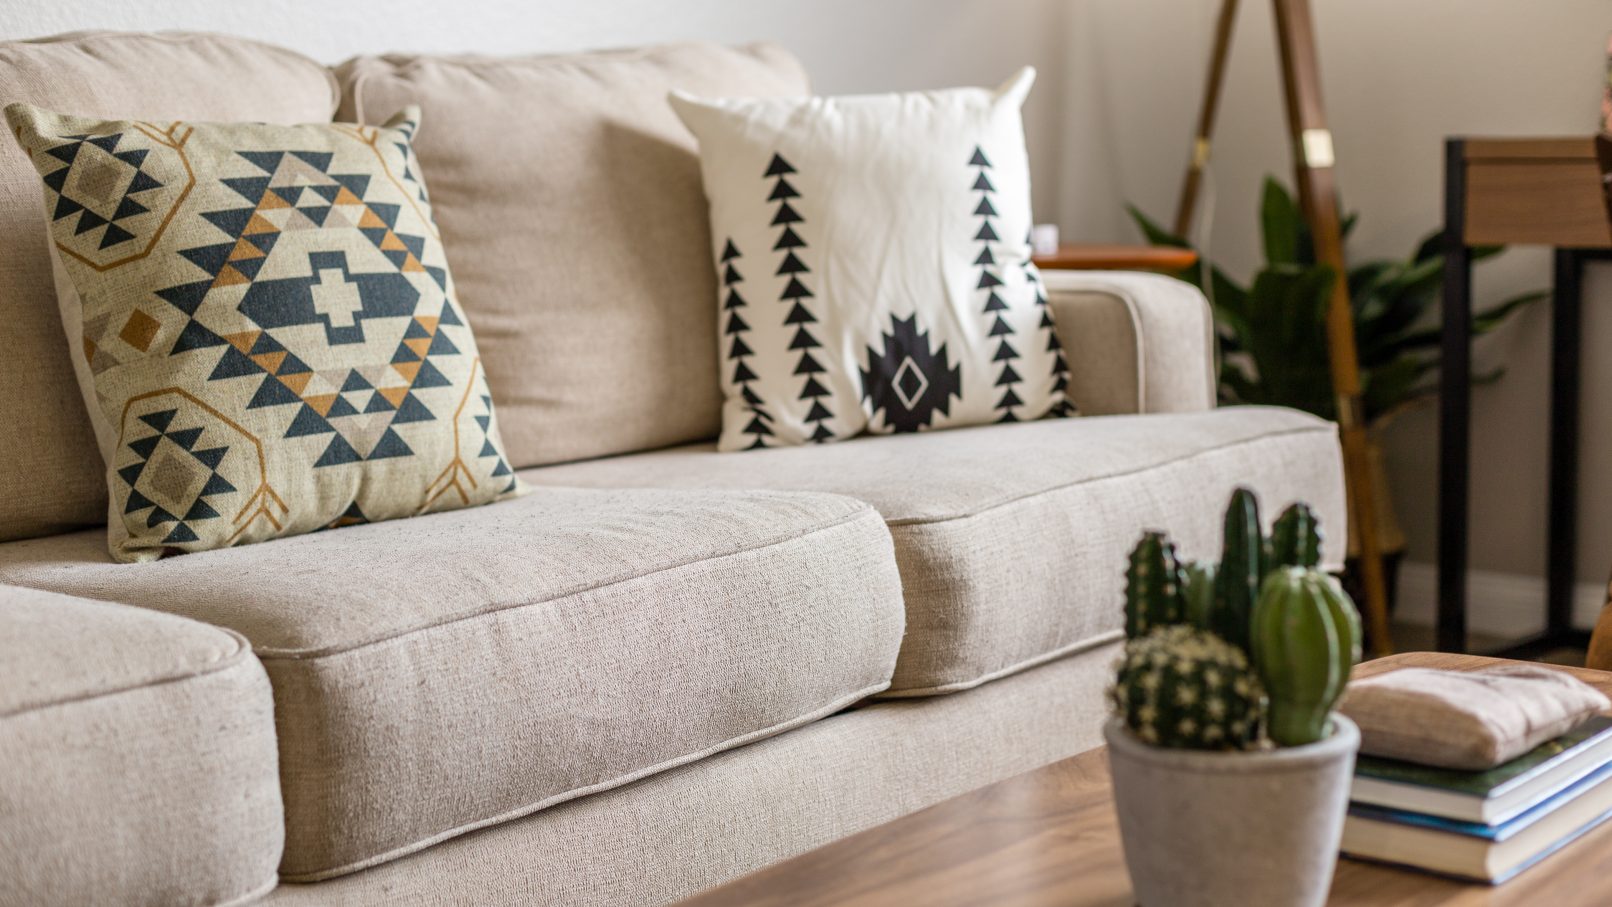 Orange County Interior Design Photography in Fullerton showcasing the details of a cream couch with Aztec inspired pillows and a small cactus on the coffee table